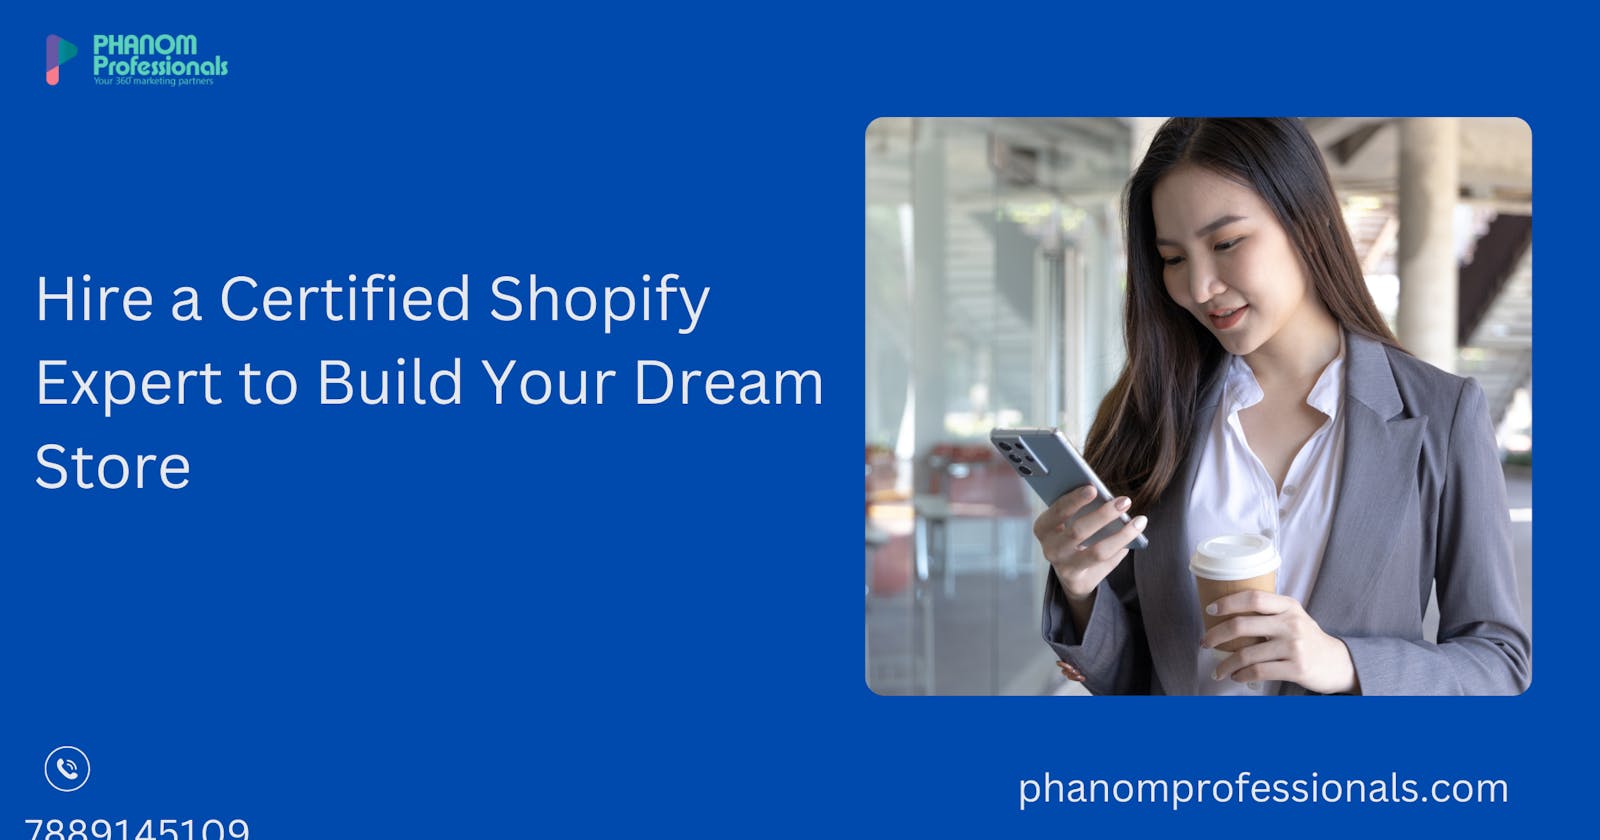 Hire a Certified Shopify Expert to Build Your Dream Store